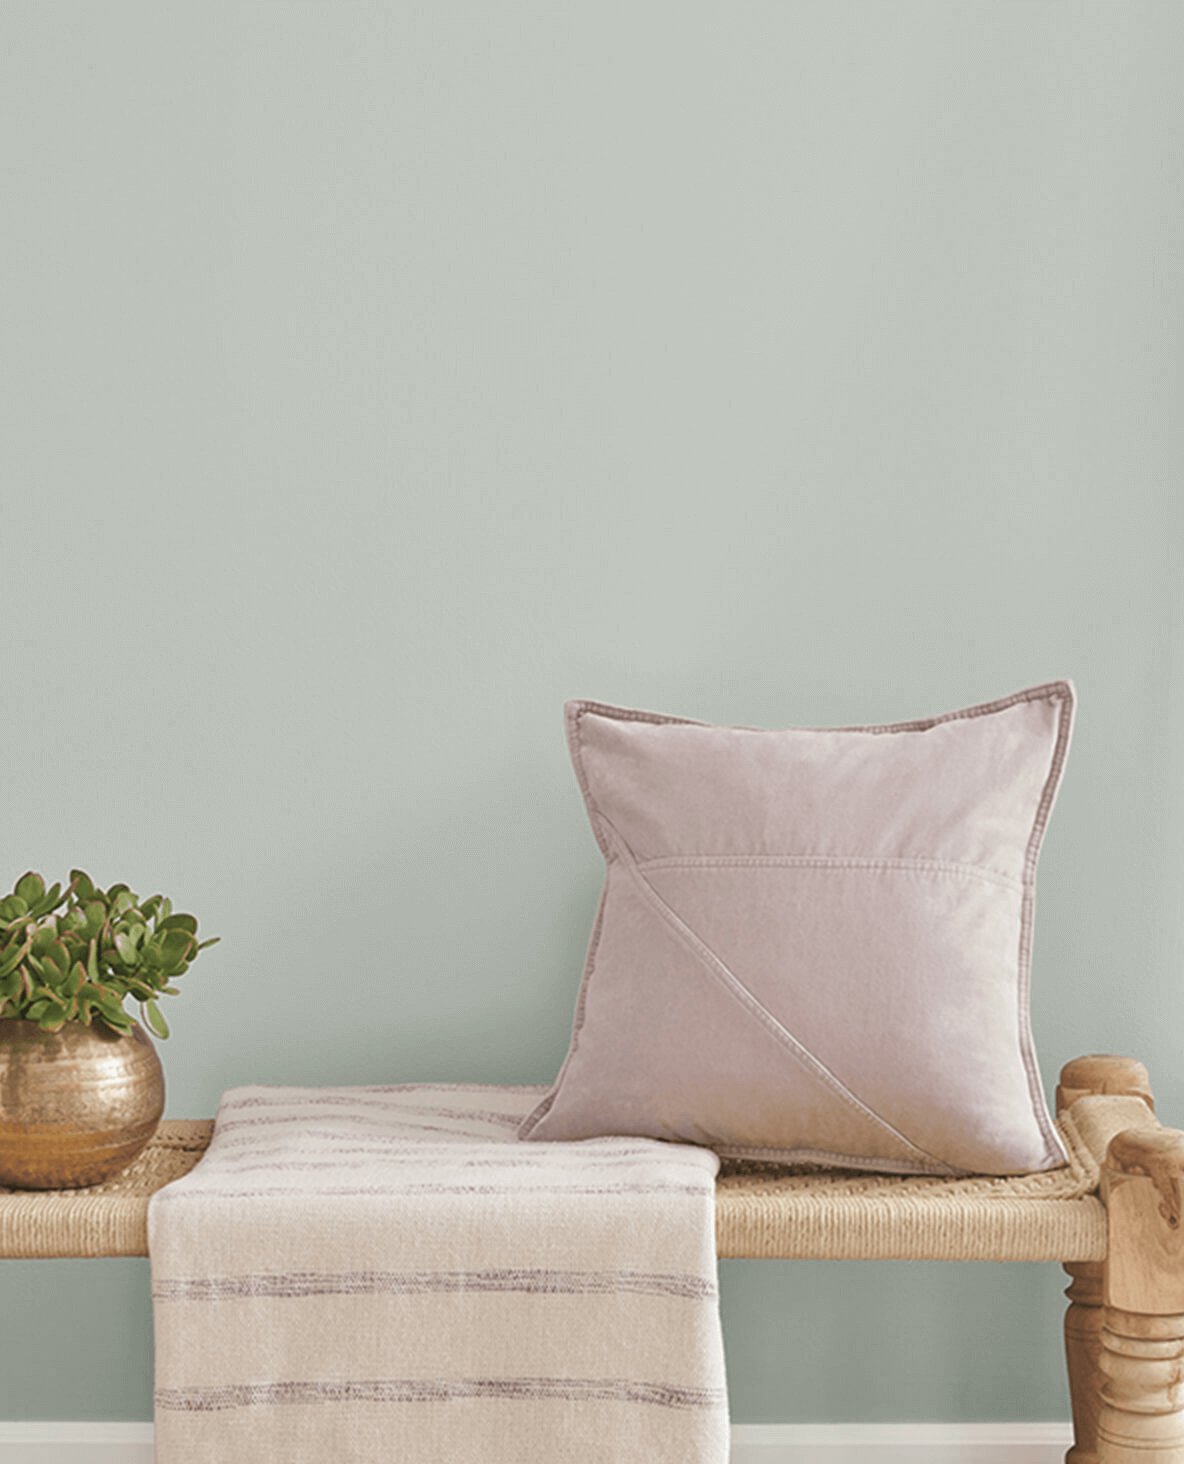 https://www.sherwin-williams.com/content/dam/common/color/SW62/SW6205-comfort-gray-lg.png